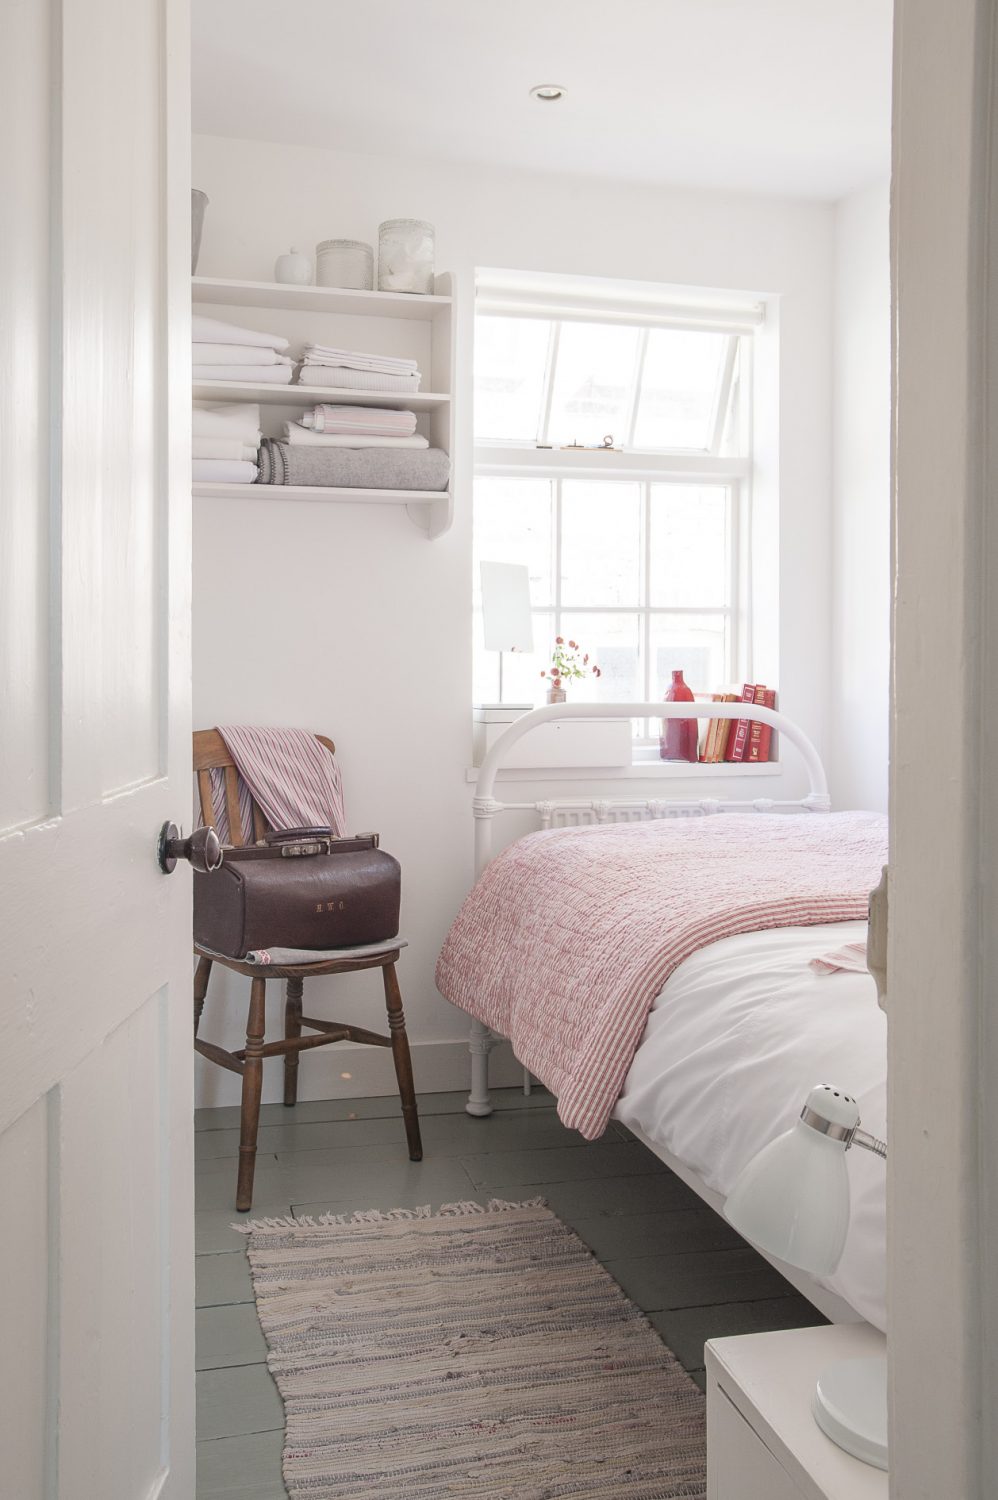 Both bedrooms feature welcoming Victorian-style ‘iron’ bedsteads. In the larger room there is even space for a modestly sized dressing room